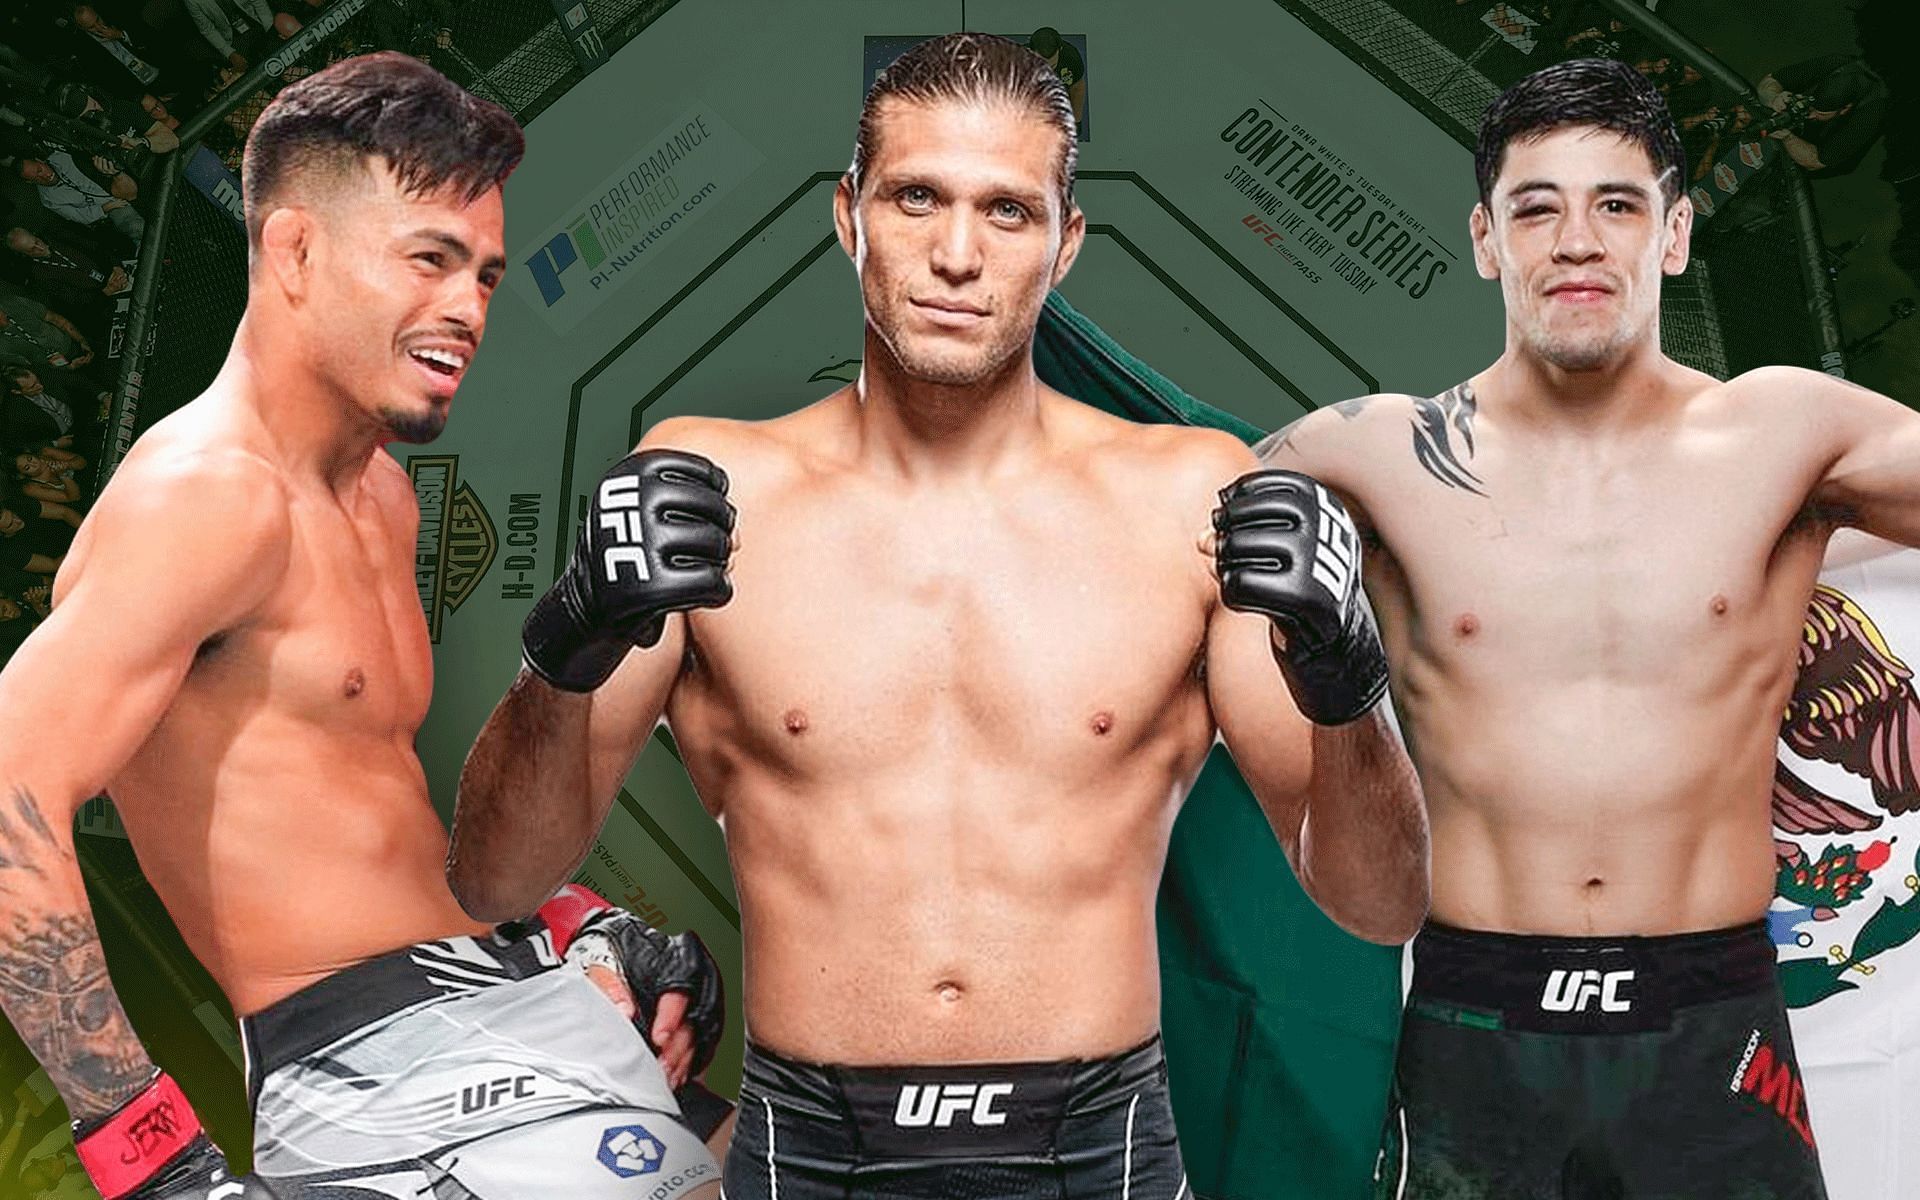 Brandon Royval (left), Brian Ortega (middle), and Brandon Moreno (right) will feature in high-stakes matchups at UFC Mexico City [Images courtesy: @broyval, @briantcity, and @theassassinbaby on Instagram]